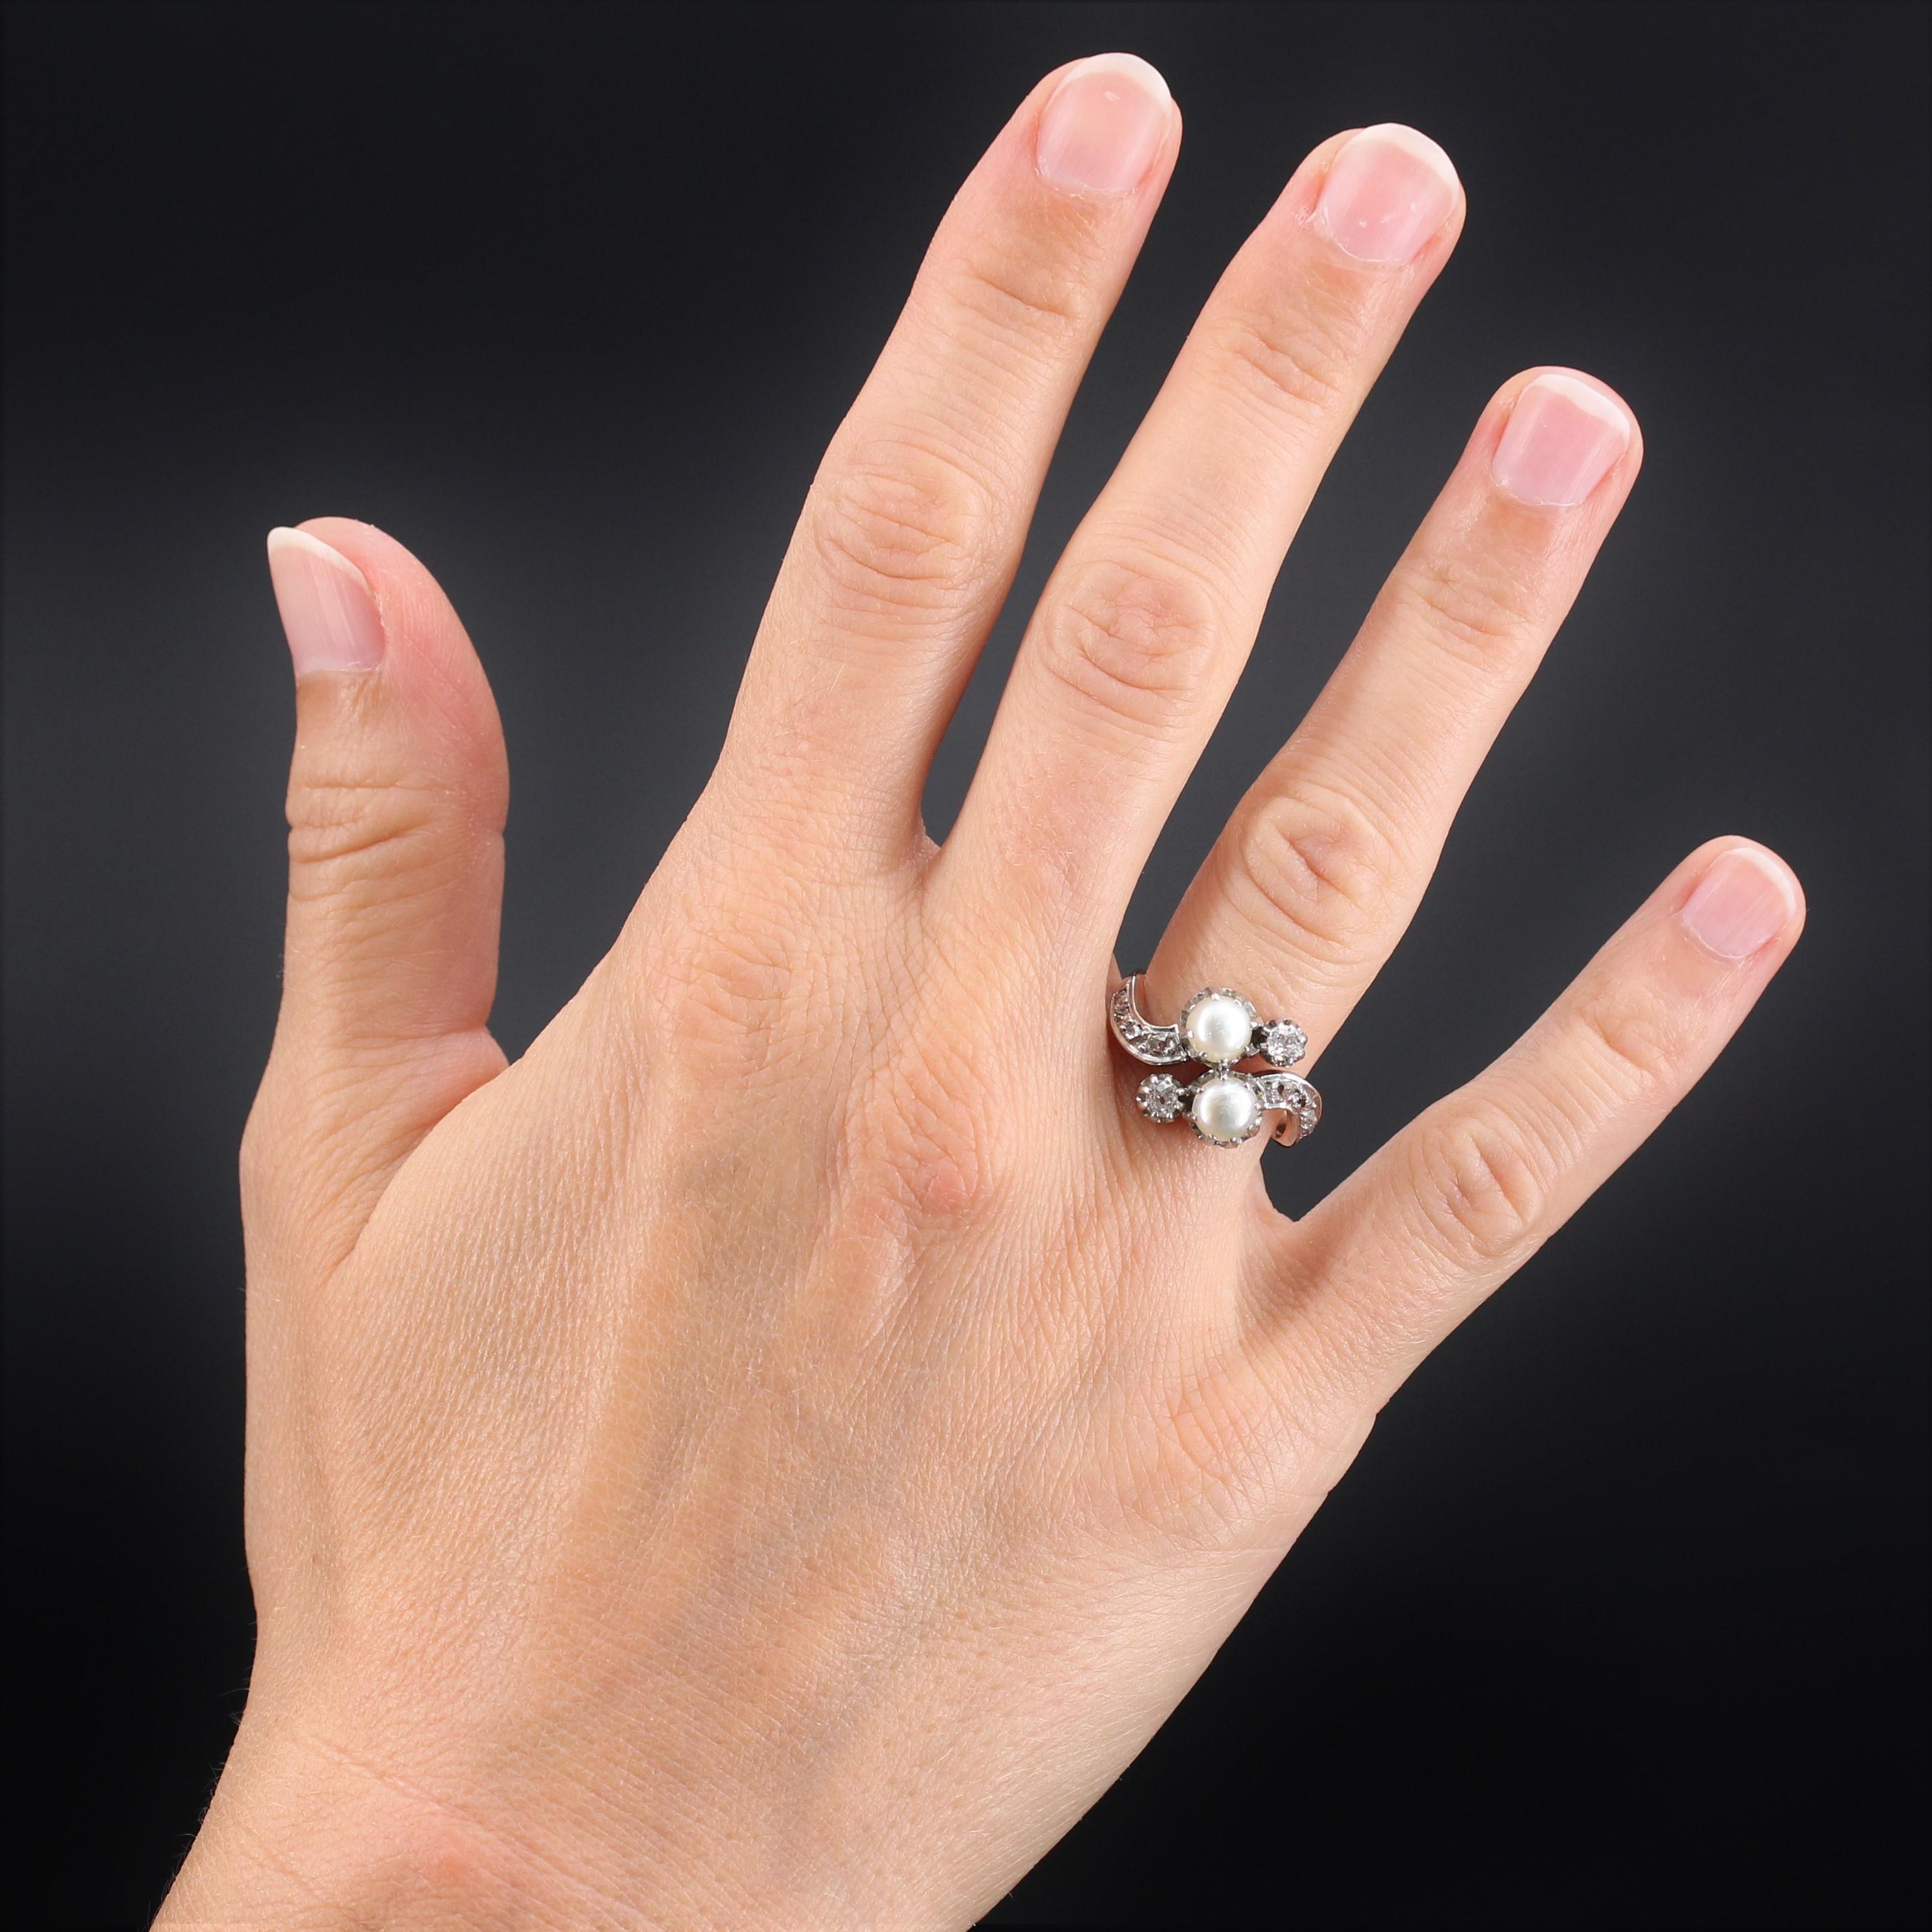 Ring in 18 karat rose gold, horse head hallmark.
Elegant antique ring of the XIXth century, it is decorated on its top of a you and me of supposedly natural pearls, and of two antique cushion- cut diamonds, on both sides. On the base, the ring is